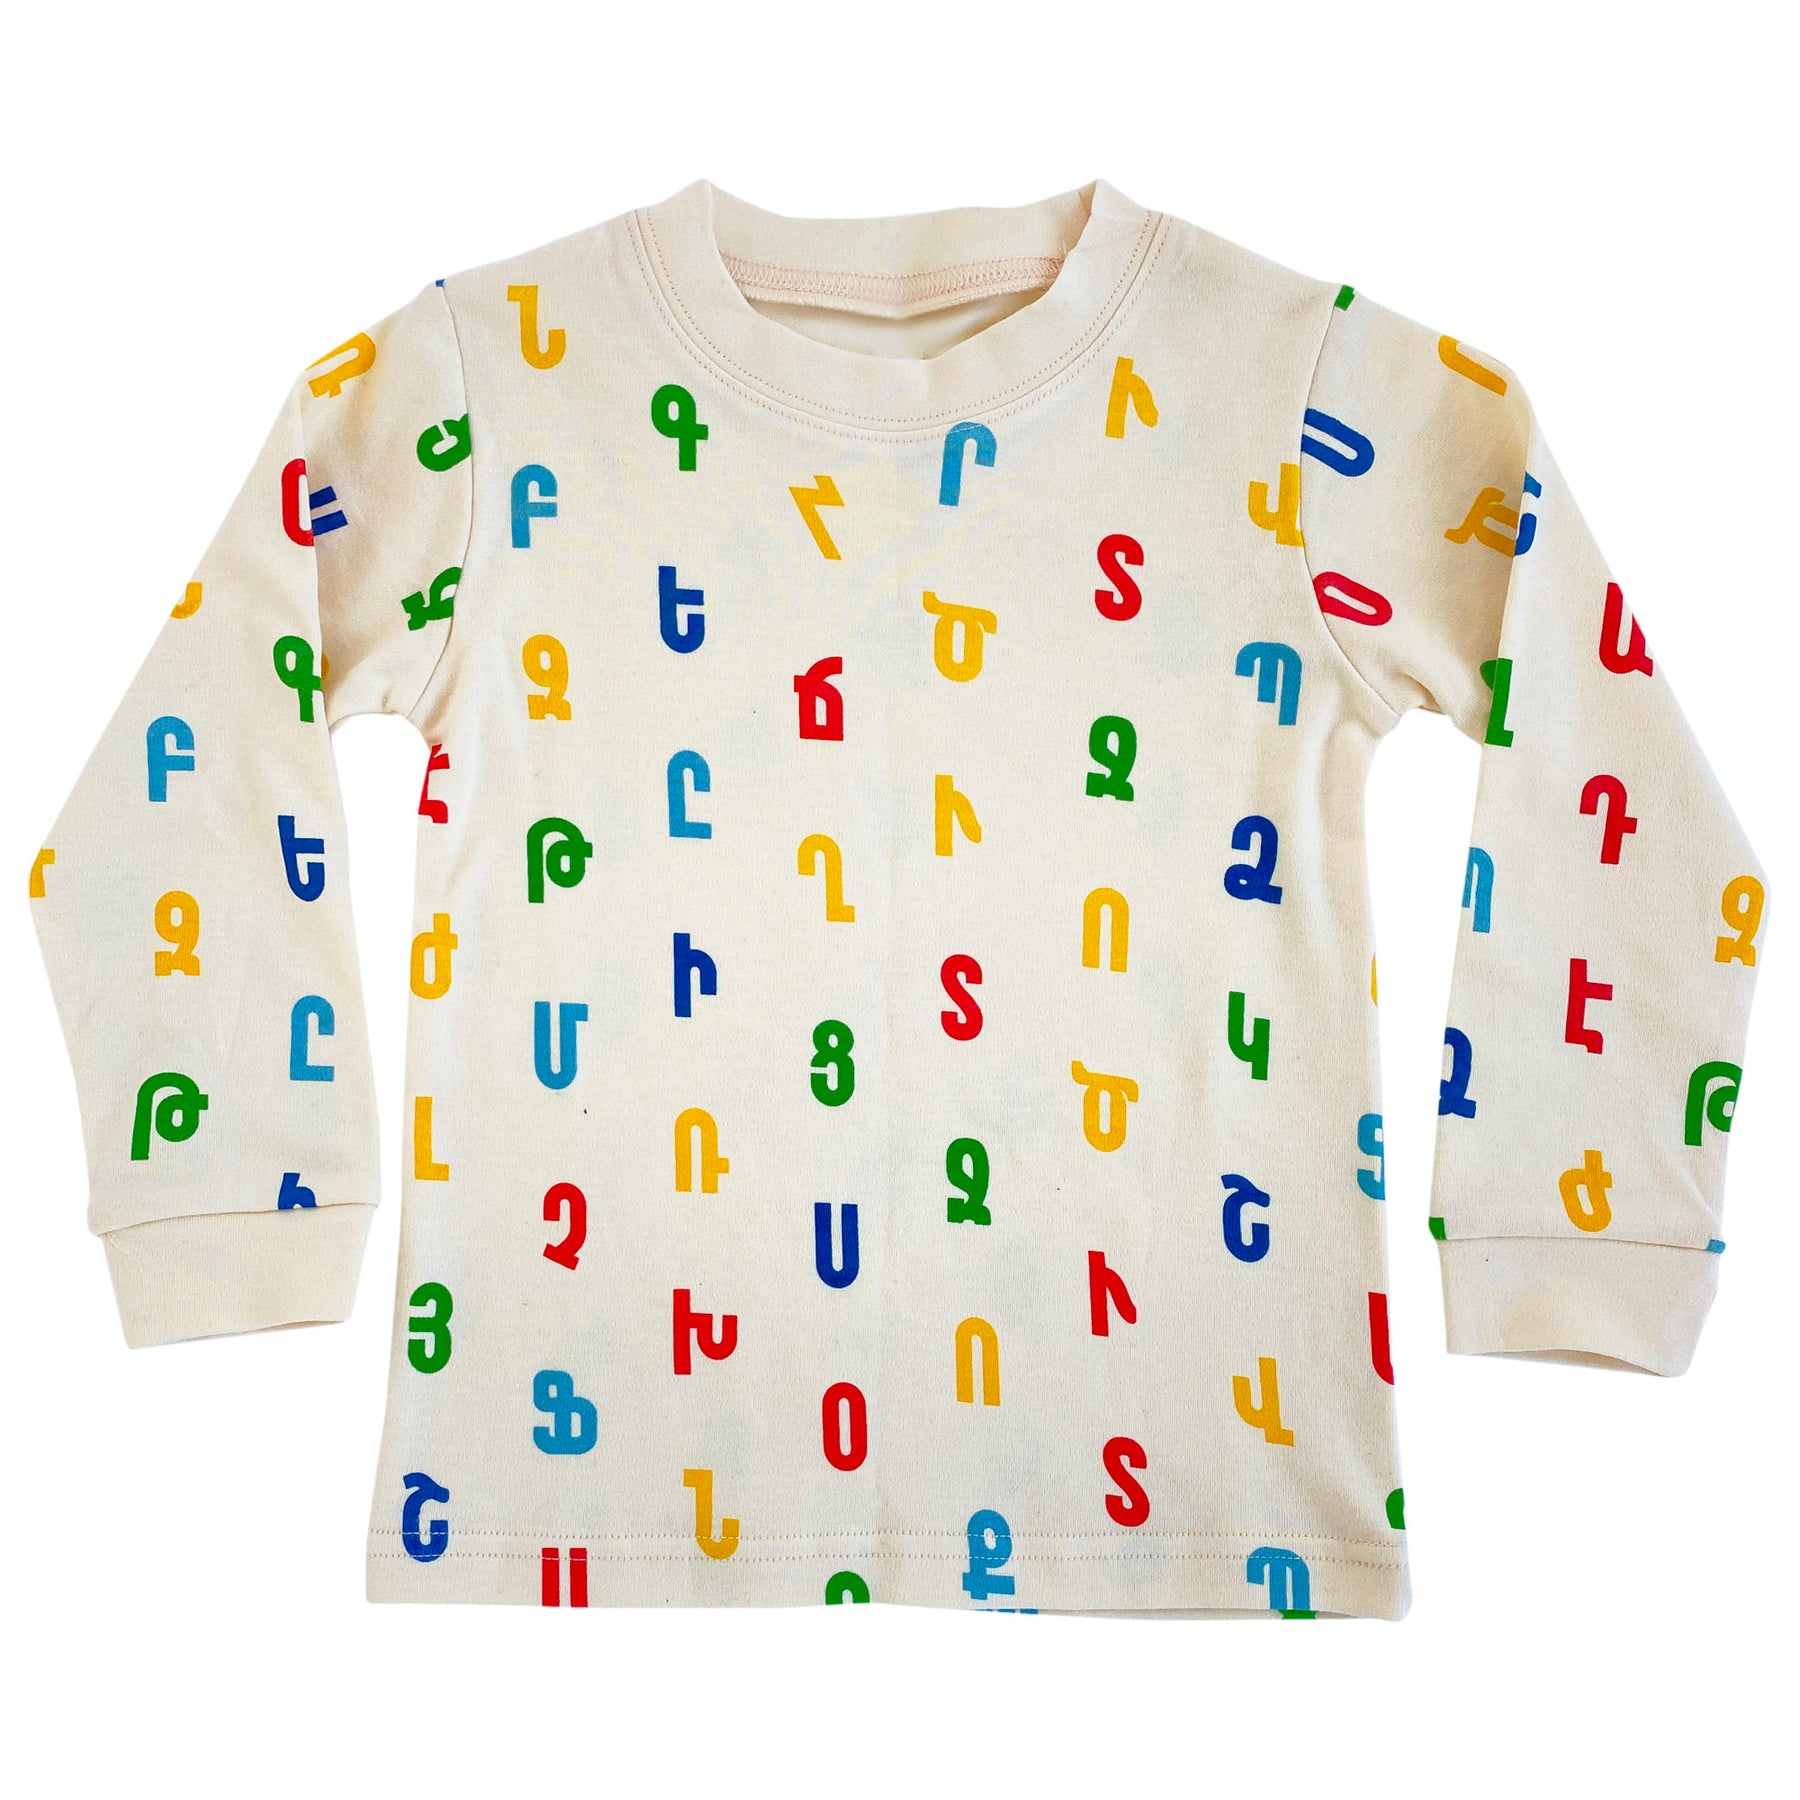 SECONDS (Garment May have minor flaws with printing/stitching - Armenian Alphabet Toddler Pajama Set